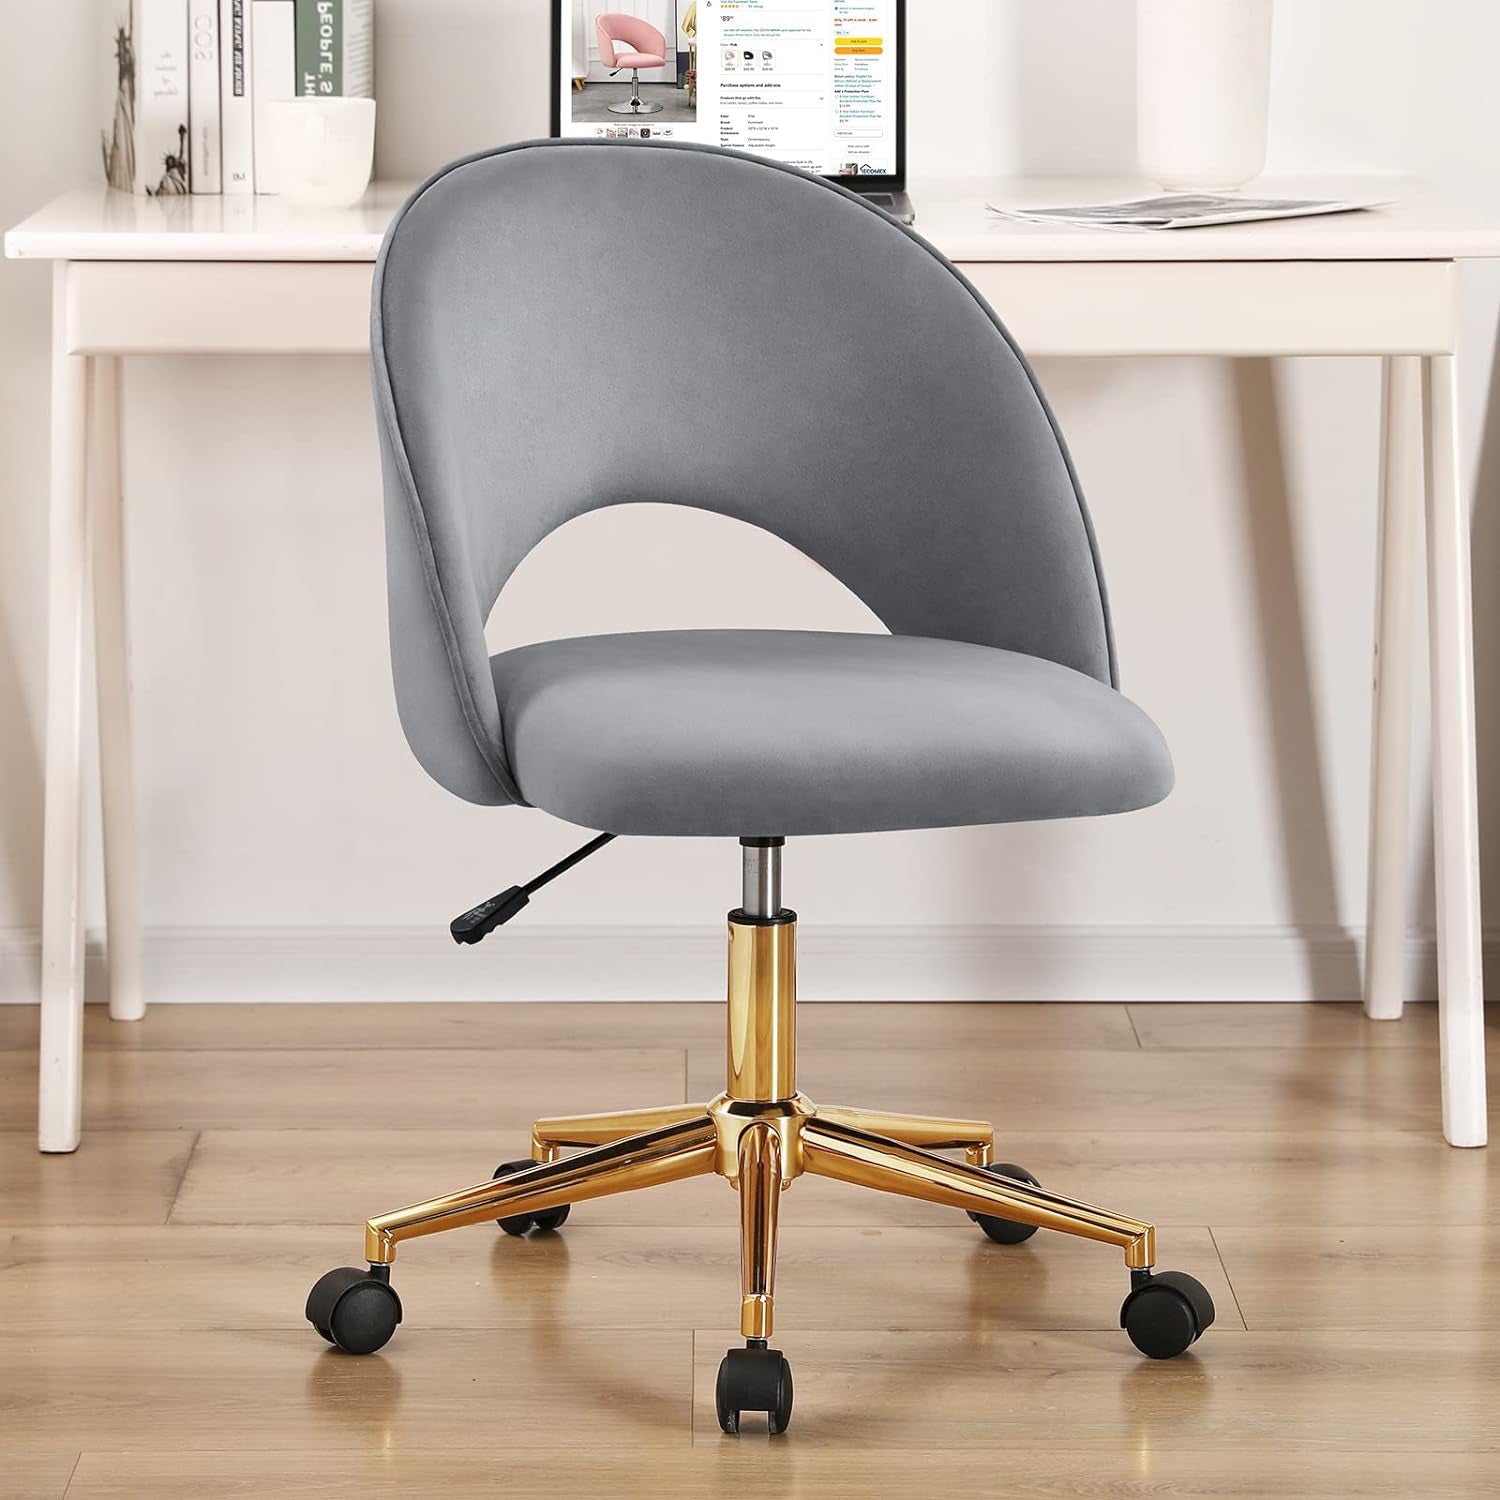 Home Office Chair Modern Swivel Vanity Chair with Gold Base Armless Cute Task Chair Mid-Back Desk Chair with Wheels for Dorm Living Room Bedroom Studying Room Vanity Room(Light Grey)